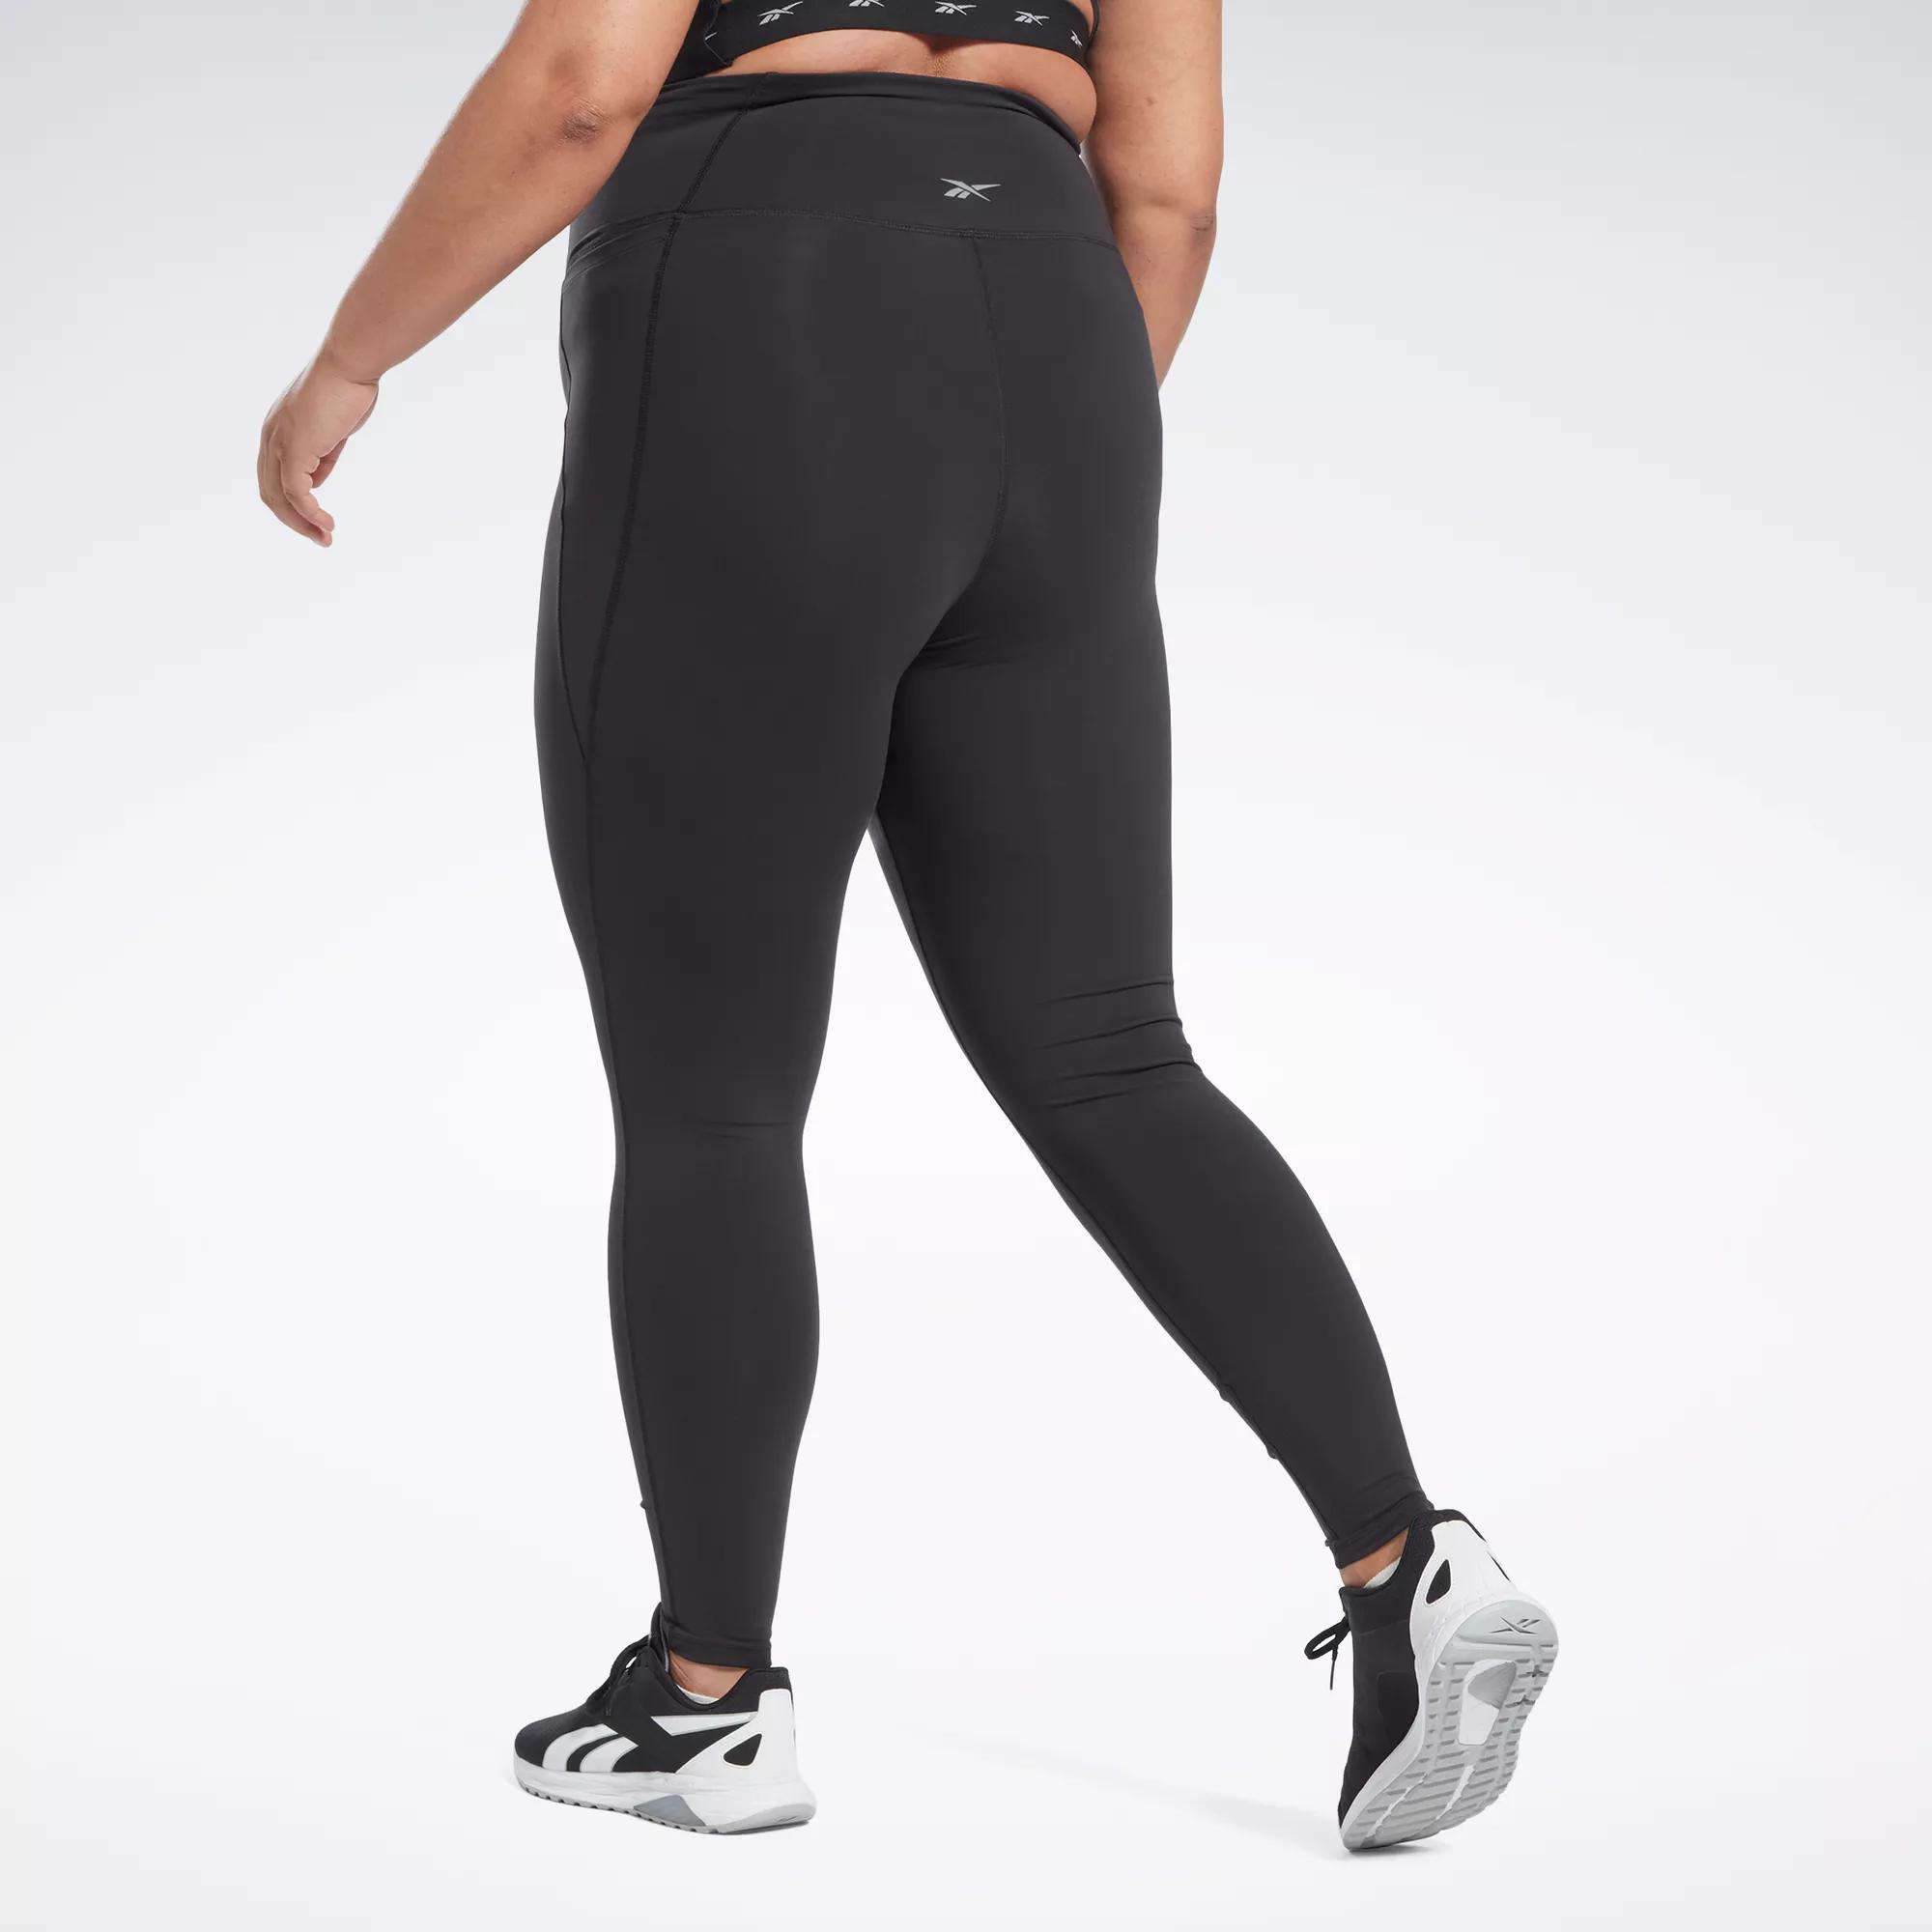 Reebok leggings Size XL - $25 Shipping available countrywide Pick